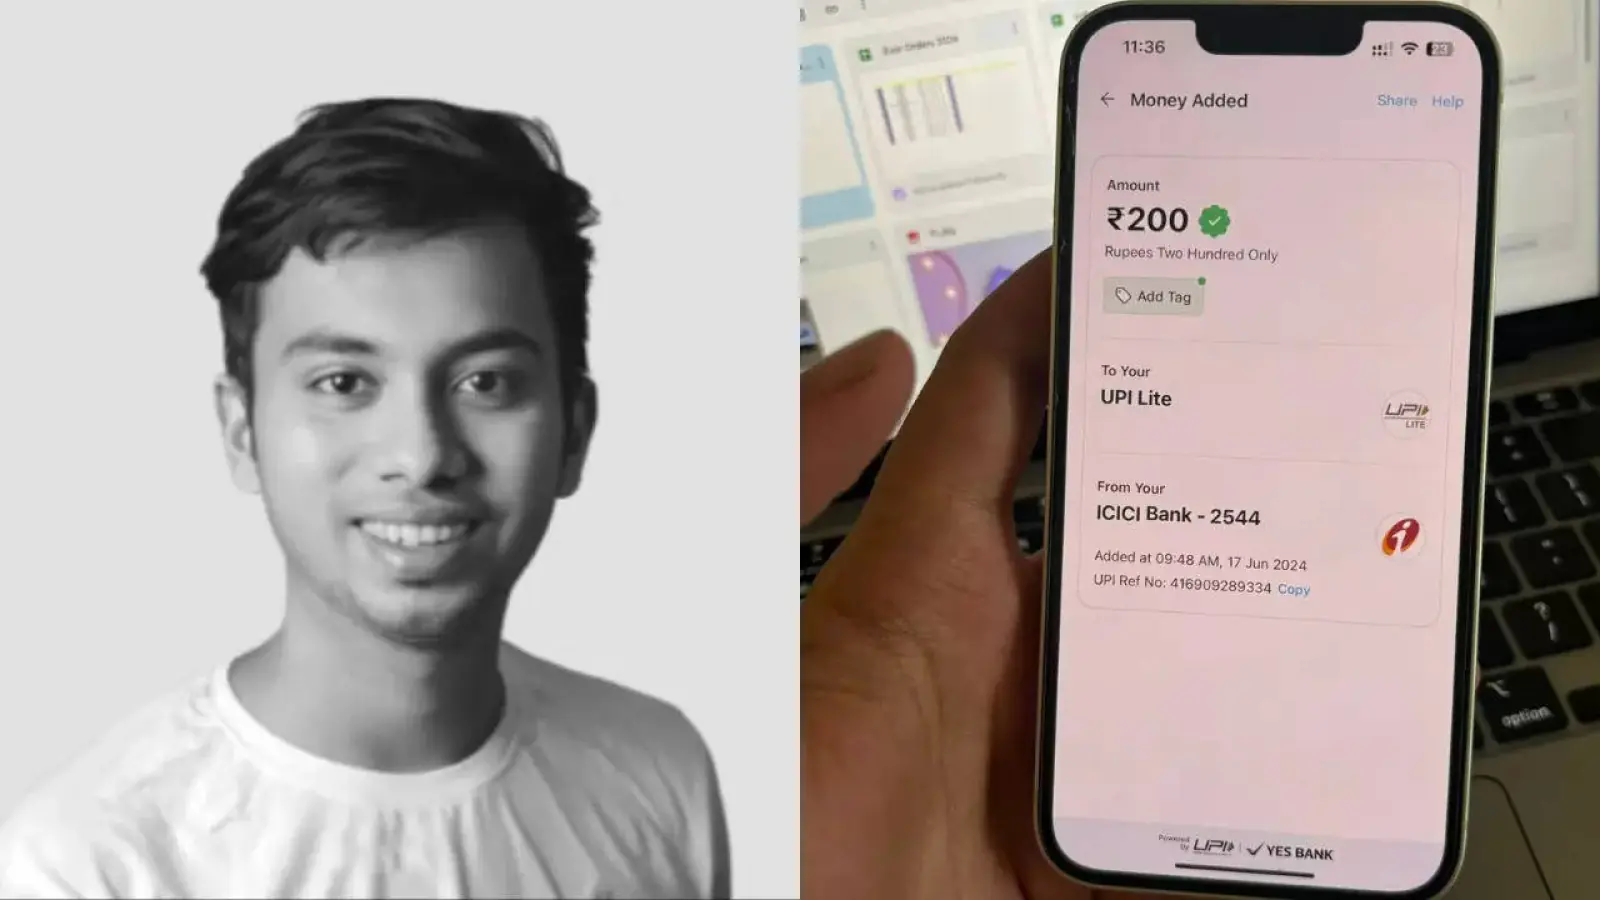 Startup Boss in Mumbai charged 200 Rs to latecomers for productivity and got trapped by paying 1000 Rs.